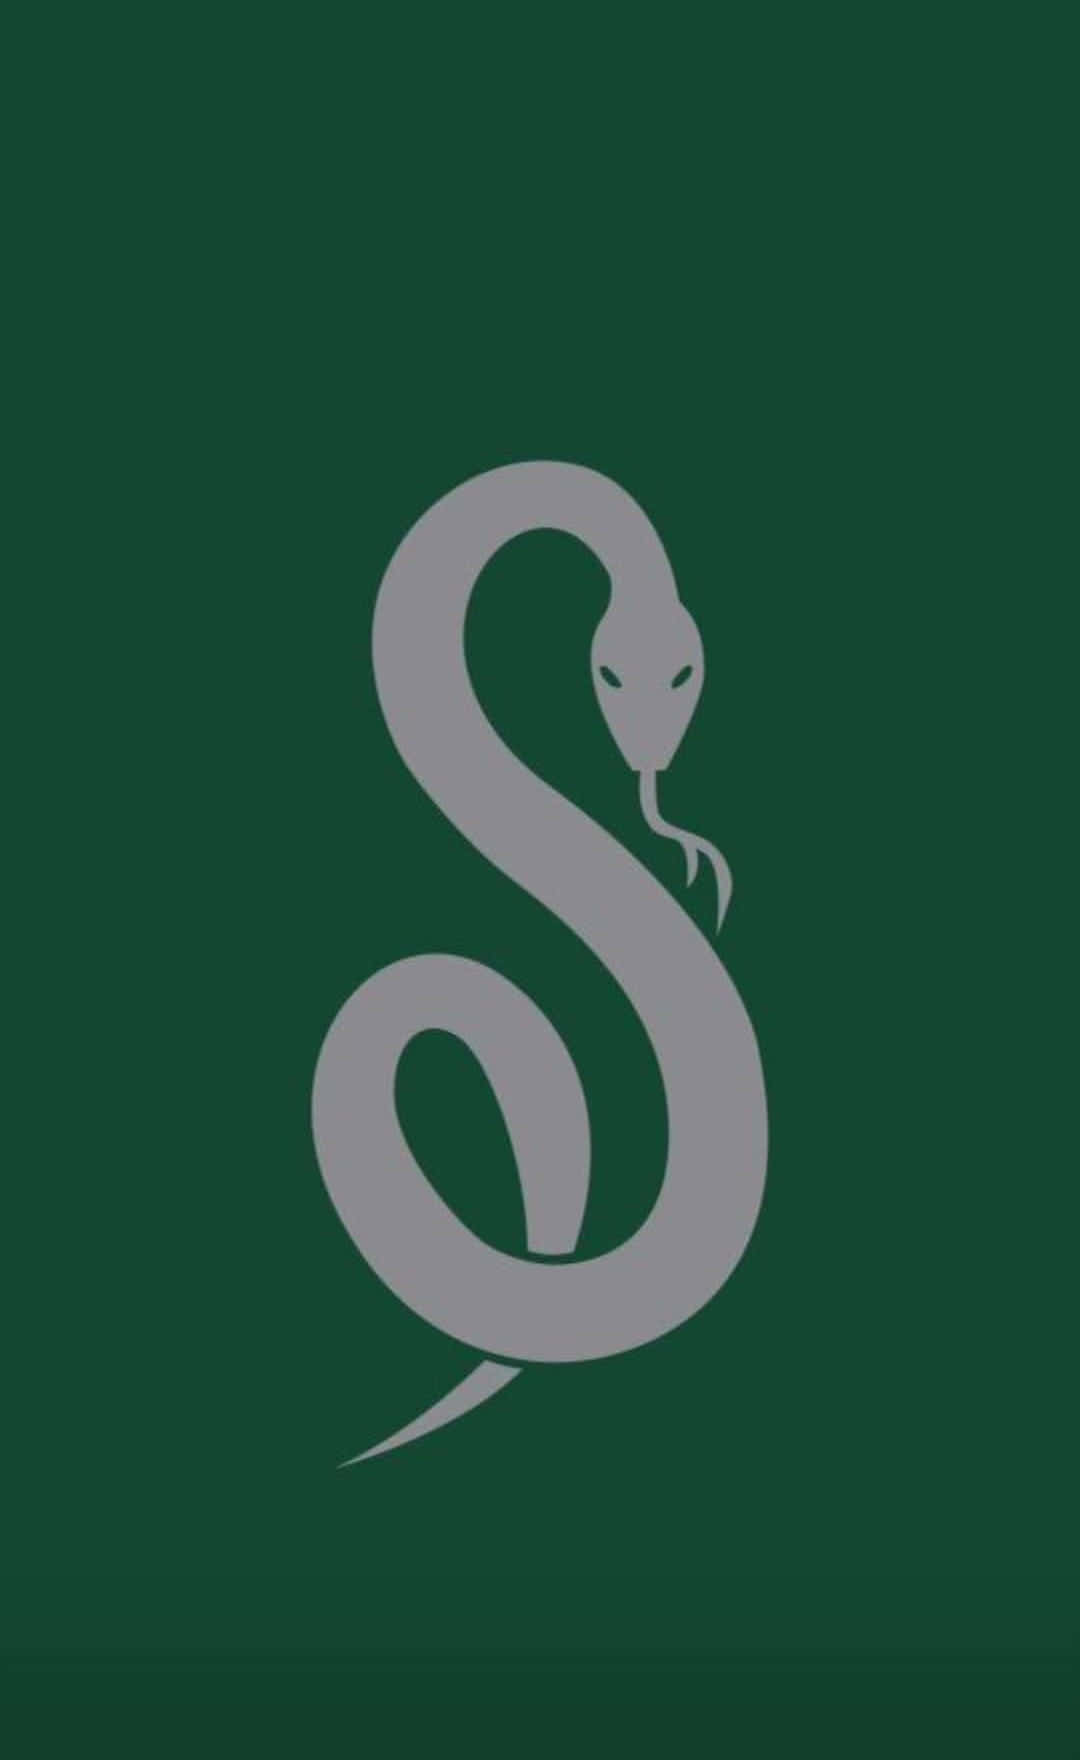 'Welcome to Slytherin: Where everyone aspires to greatness'